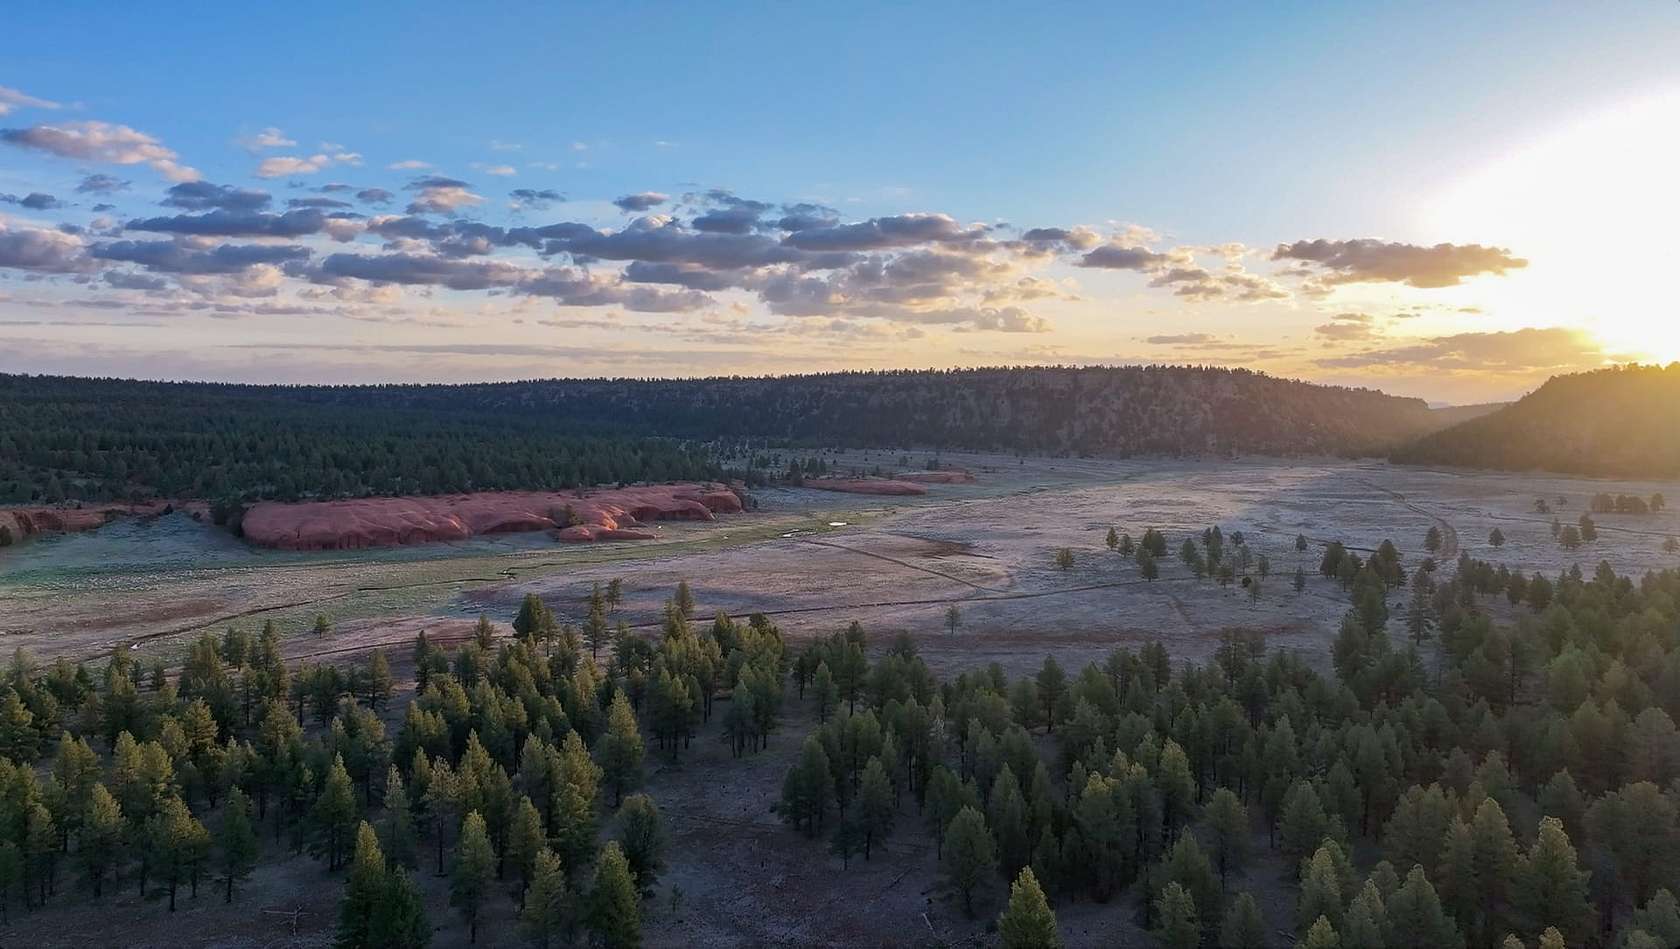 7,540 Acres of Recreational Land & Farm for Sale in Grants, New Mexico